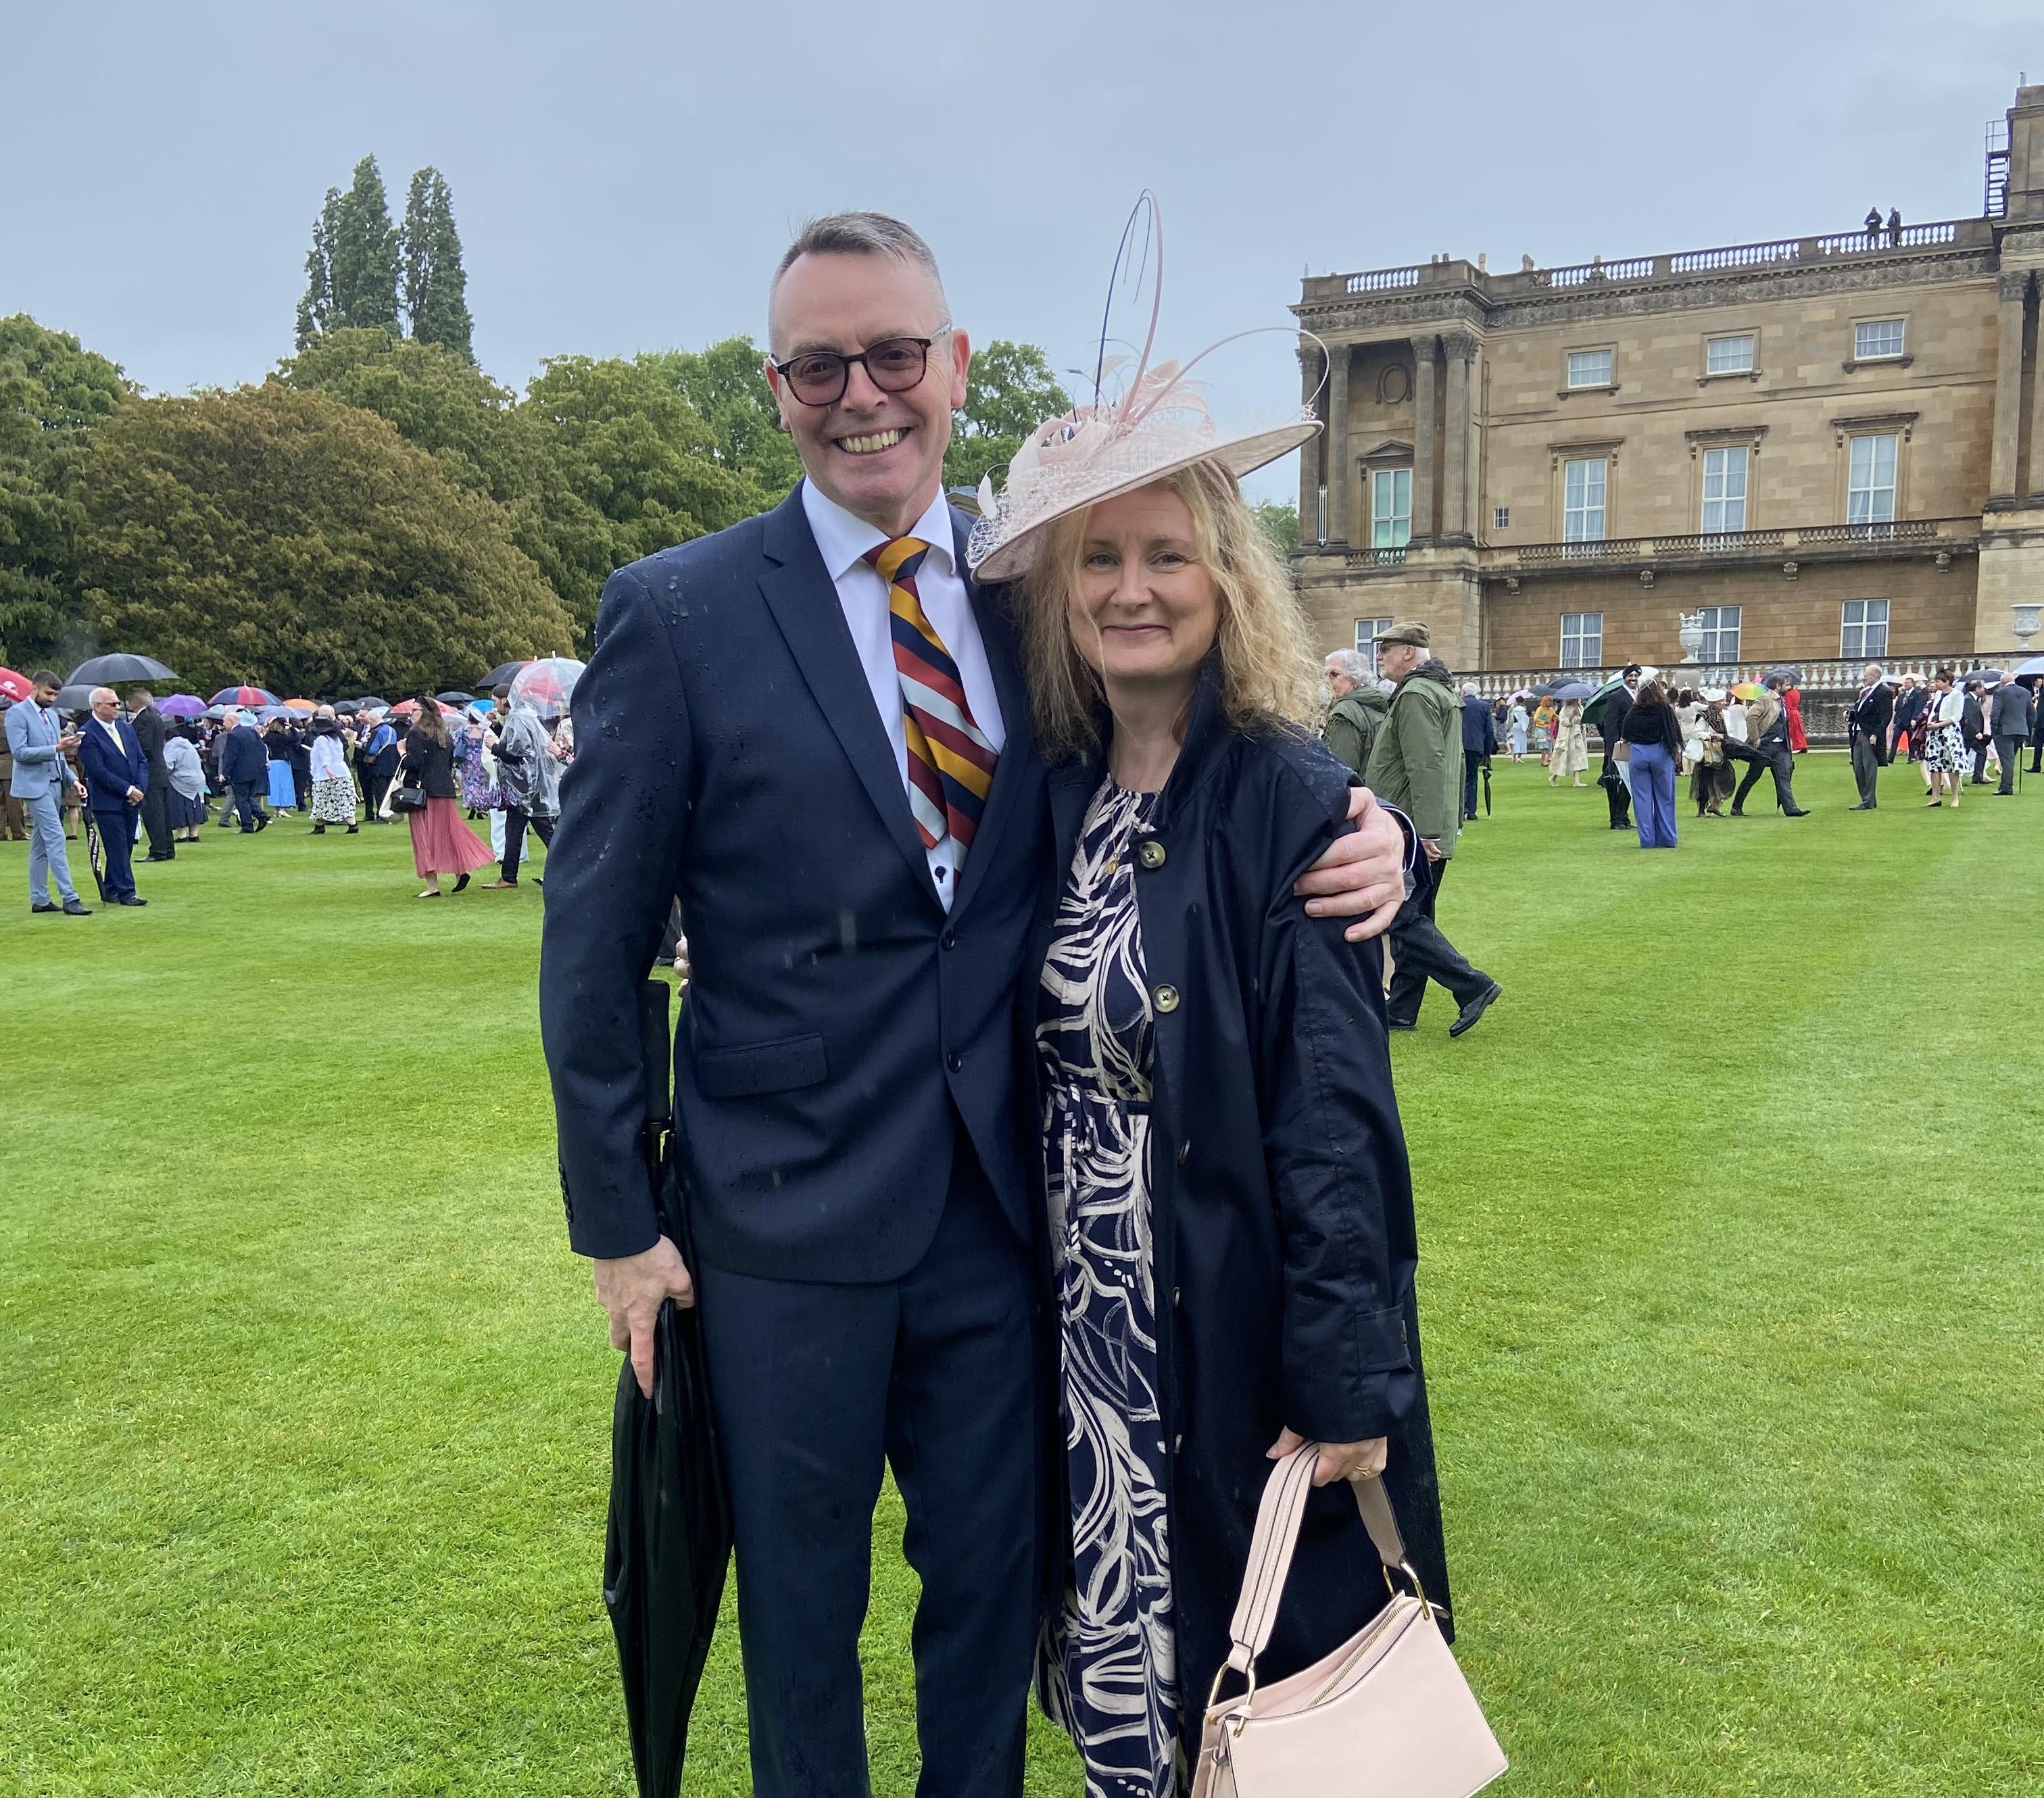 Vince & Kath McNally at The Palace Garden Party